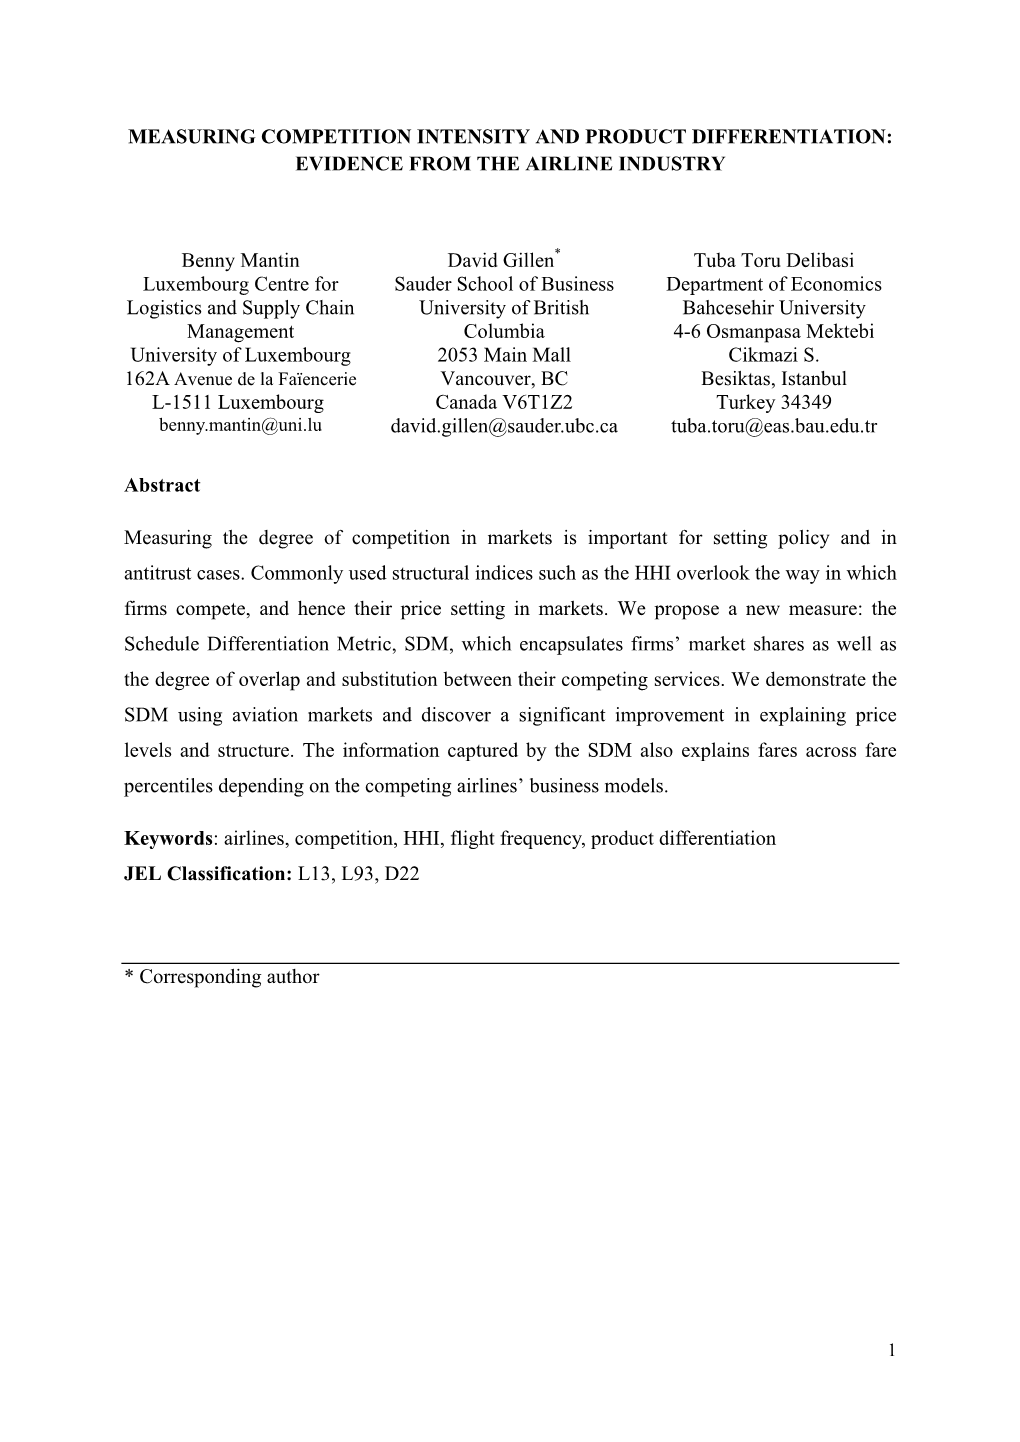 Measuring Competition Intensity and Product Differentiation: Evidence from the Airline Industry